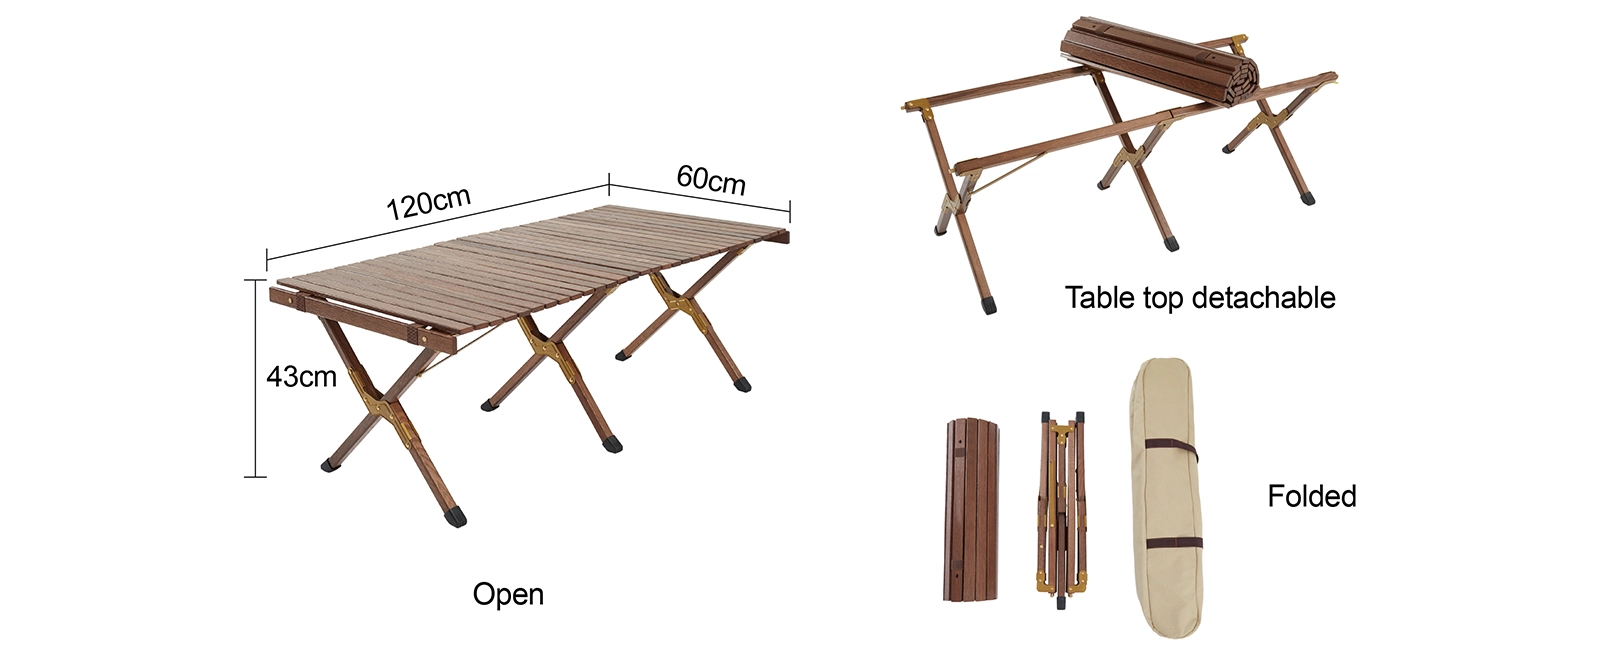 details of Outdoor Folding Furniture Beech Wood Picnic Table